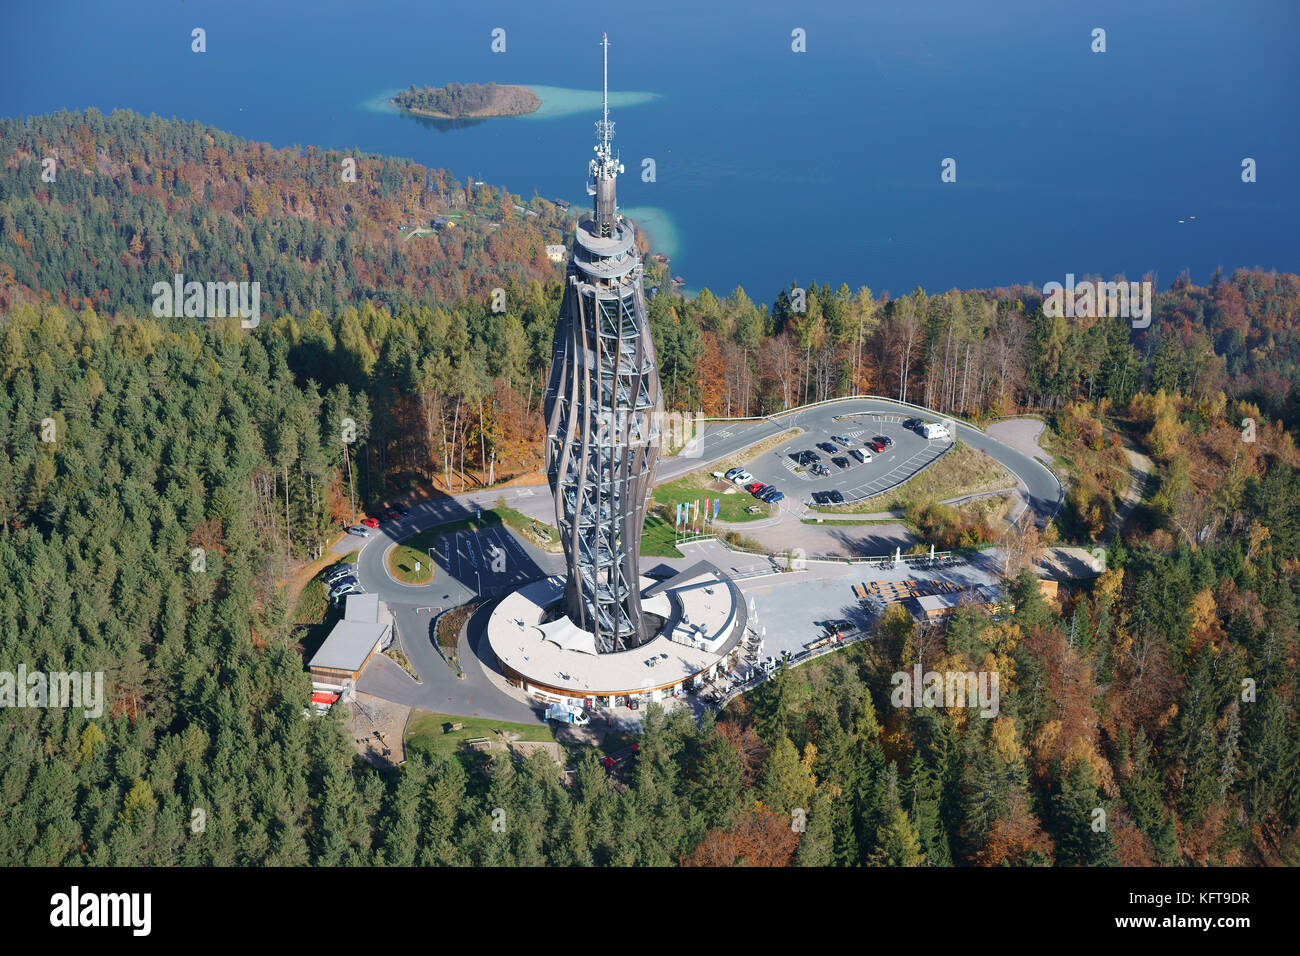 AERIAL VIEW. Futuristic wooden tower used for observation and television transmission (height: 100m). Pyramidenkogel, Wörthersee, Carinthia, Austria. Stock Photo